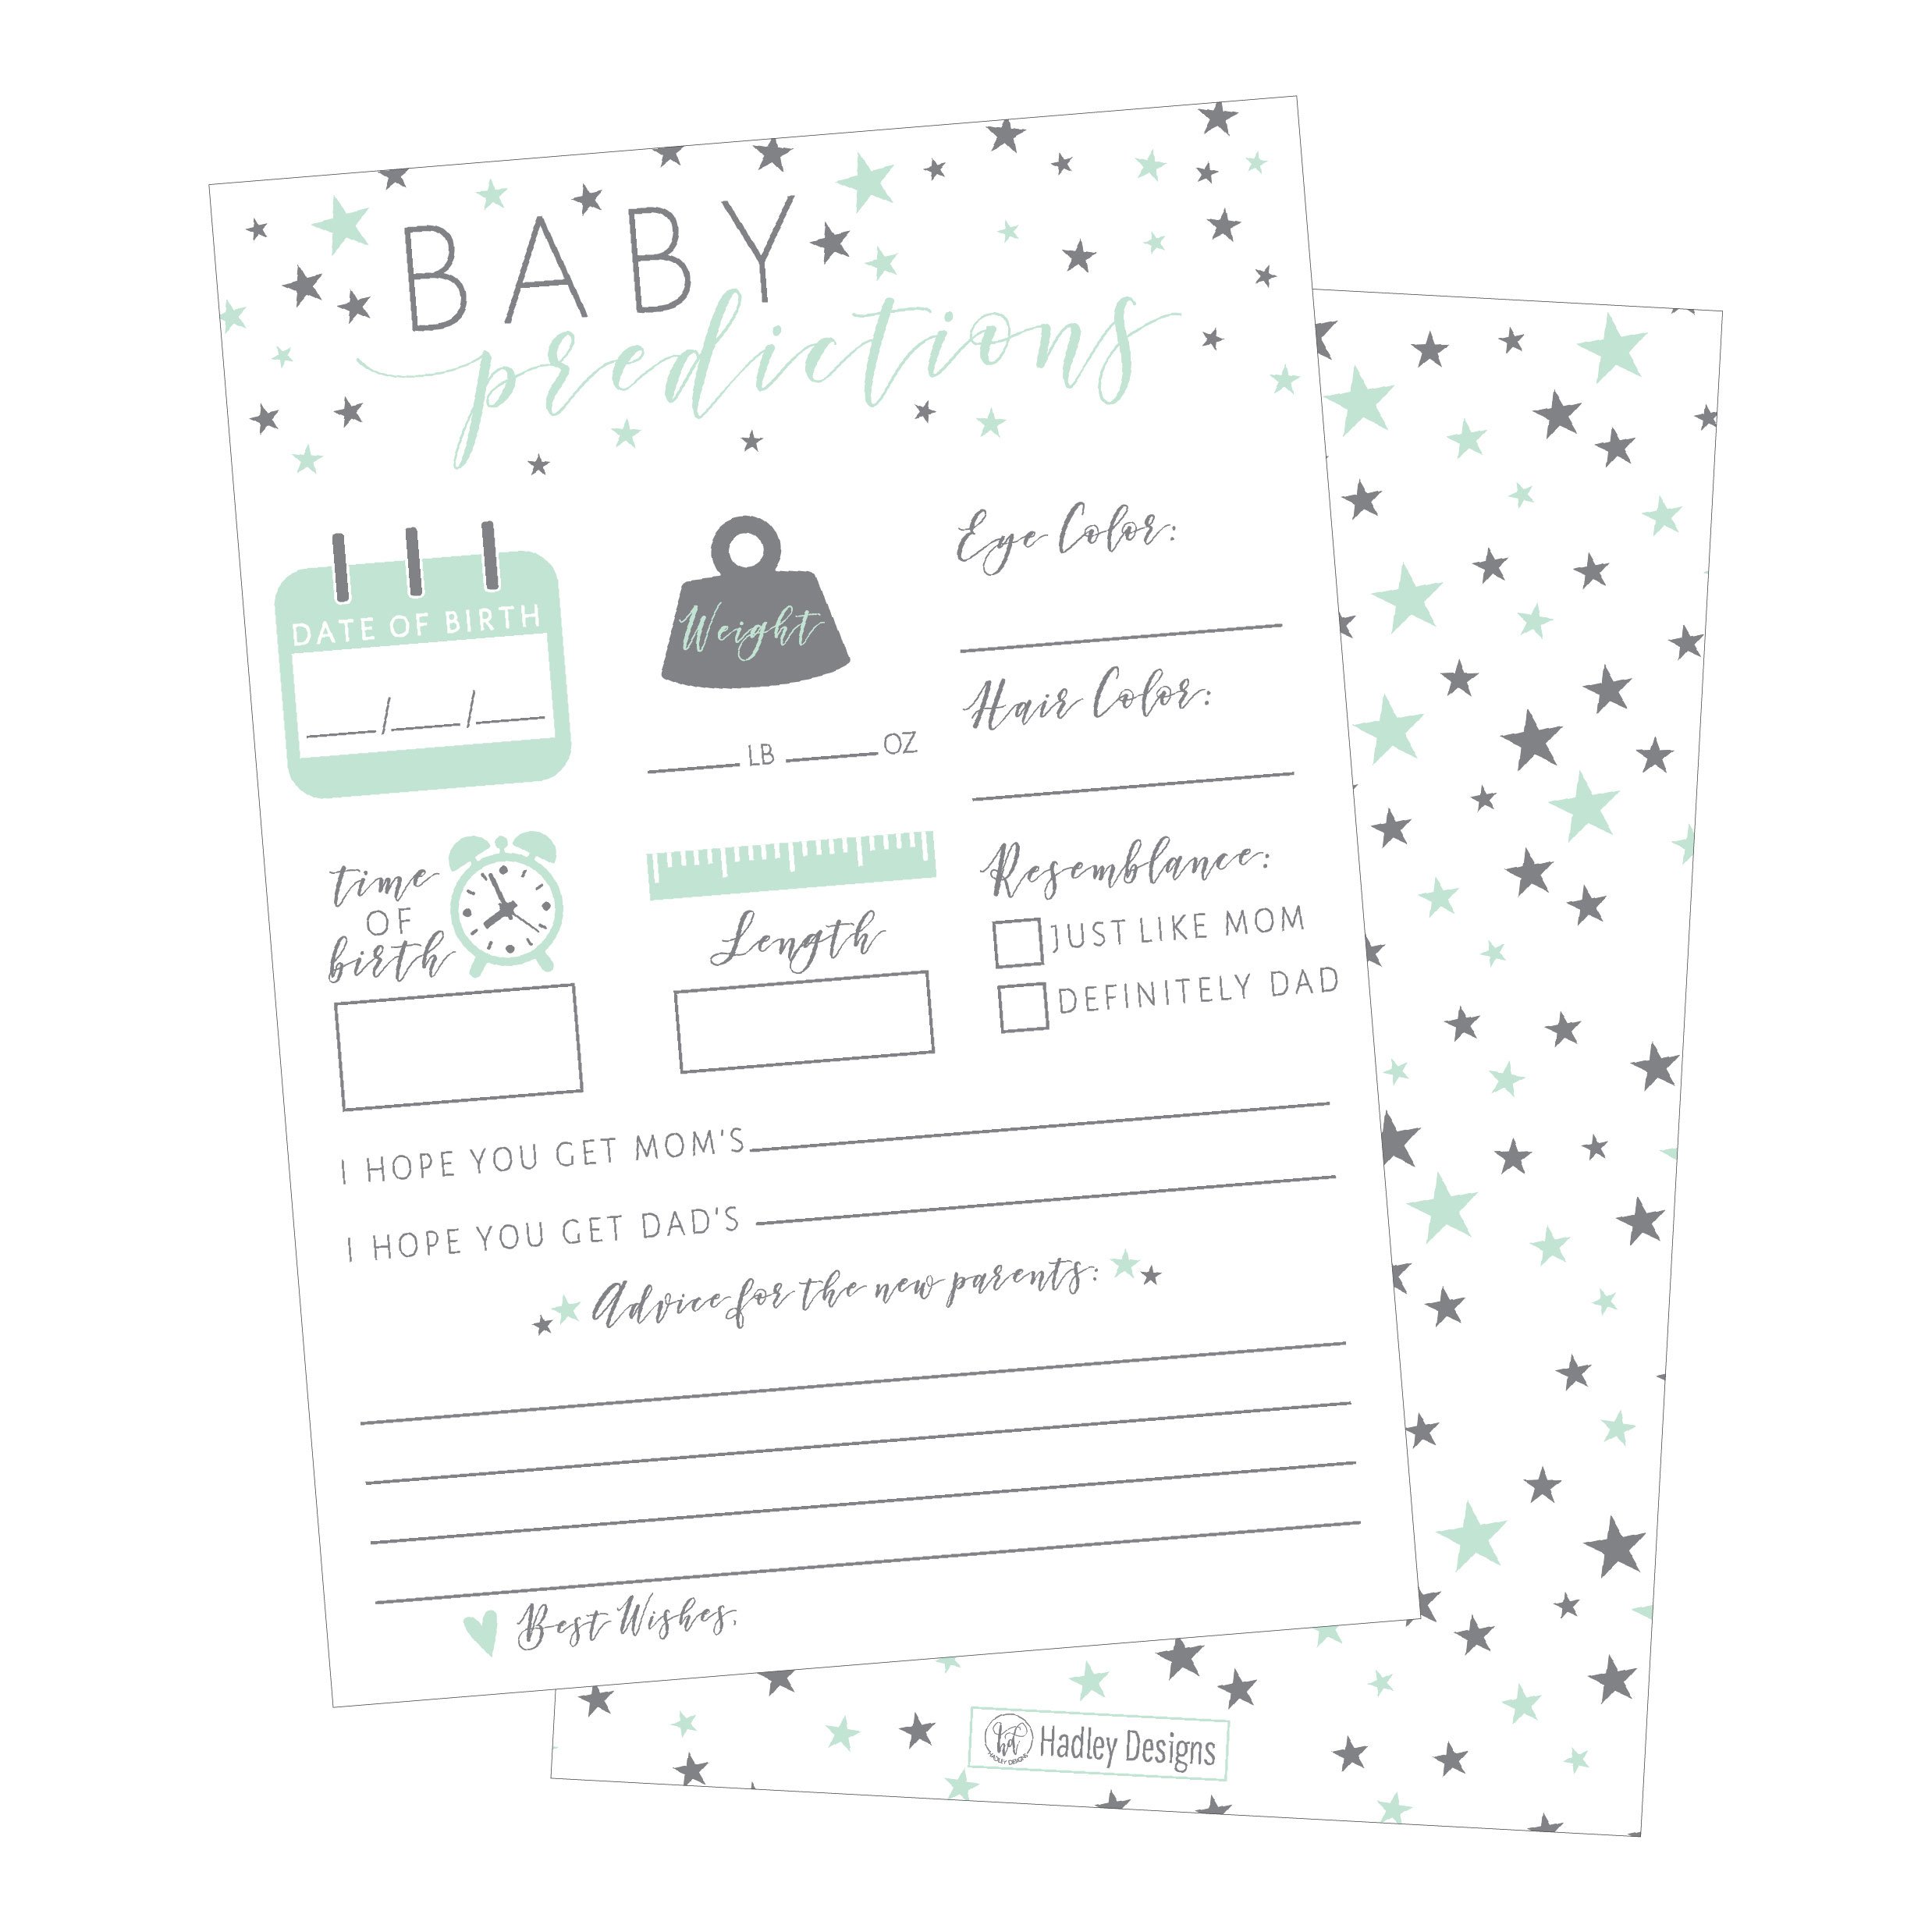 50 Mint Stars Advice and Prediction Cards for Baby Shower Game, New Mom & Dad Card or Mommy & Daddy To Be, For Girl or Boy Babies New Parent Message Advice Book, Fun Gender Neutral Shower Party Favors